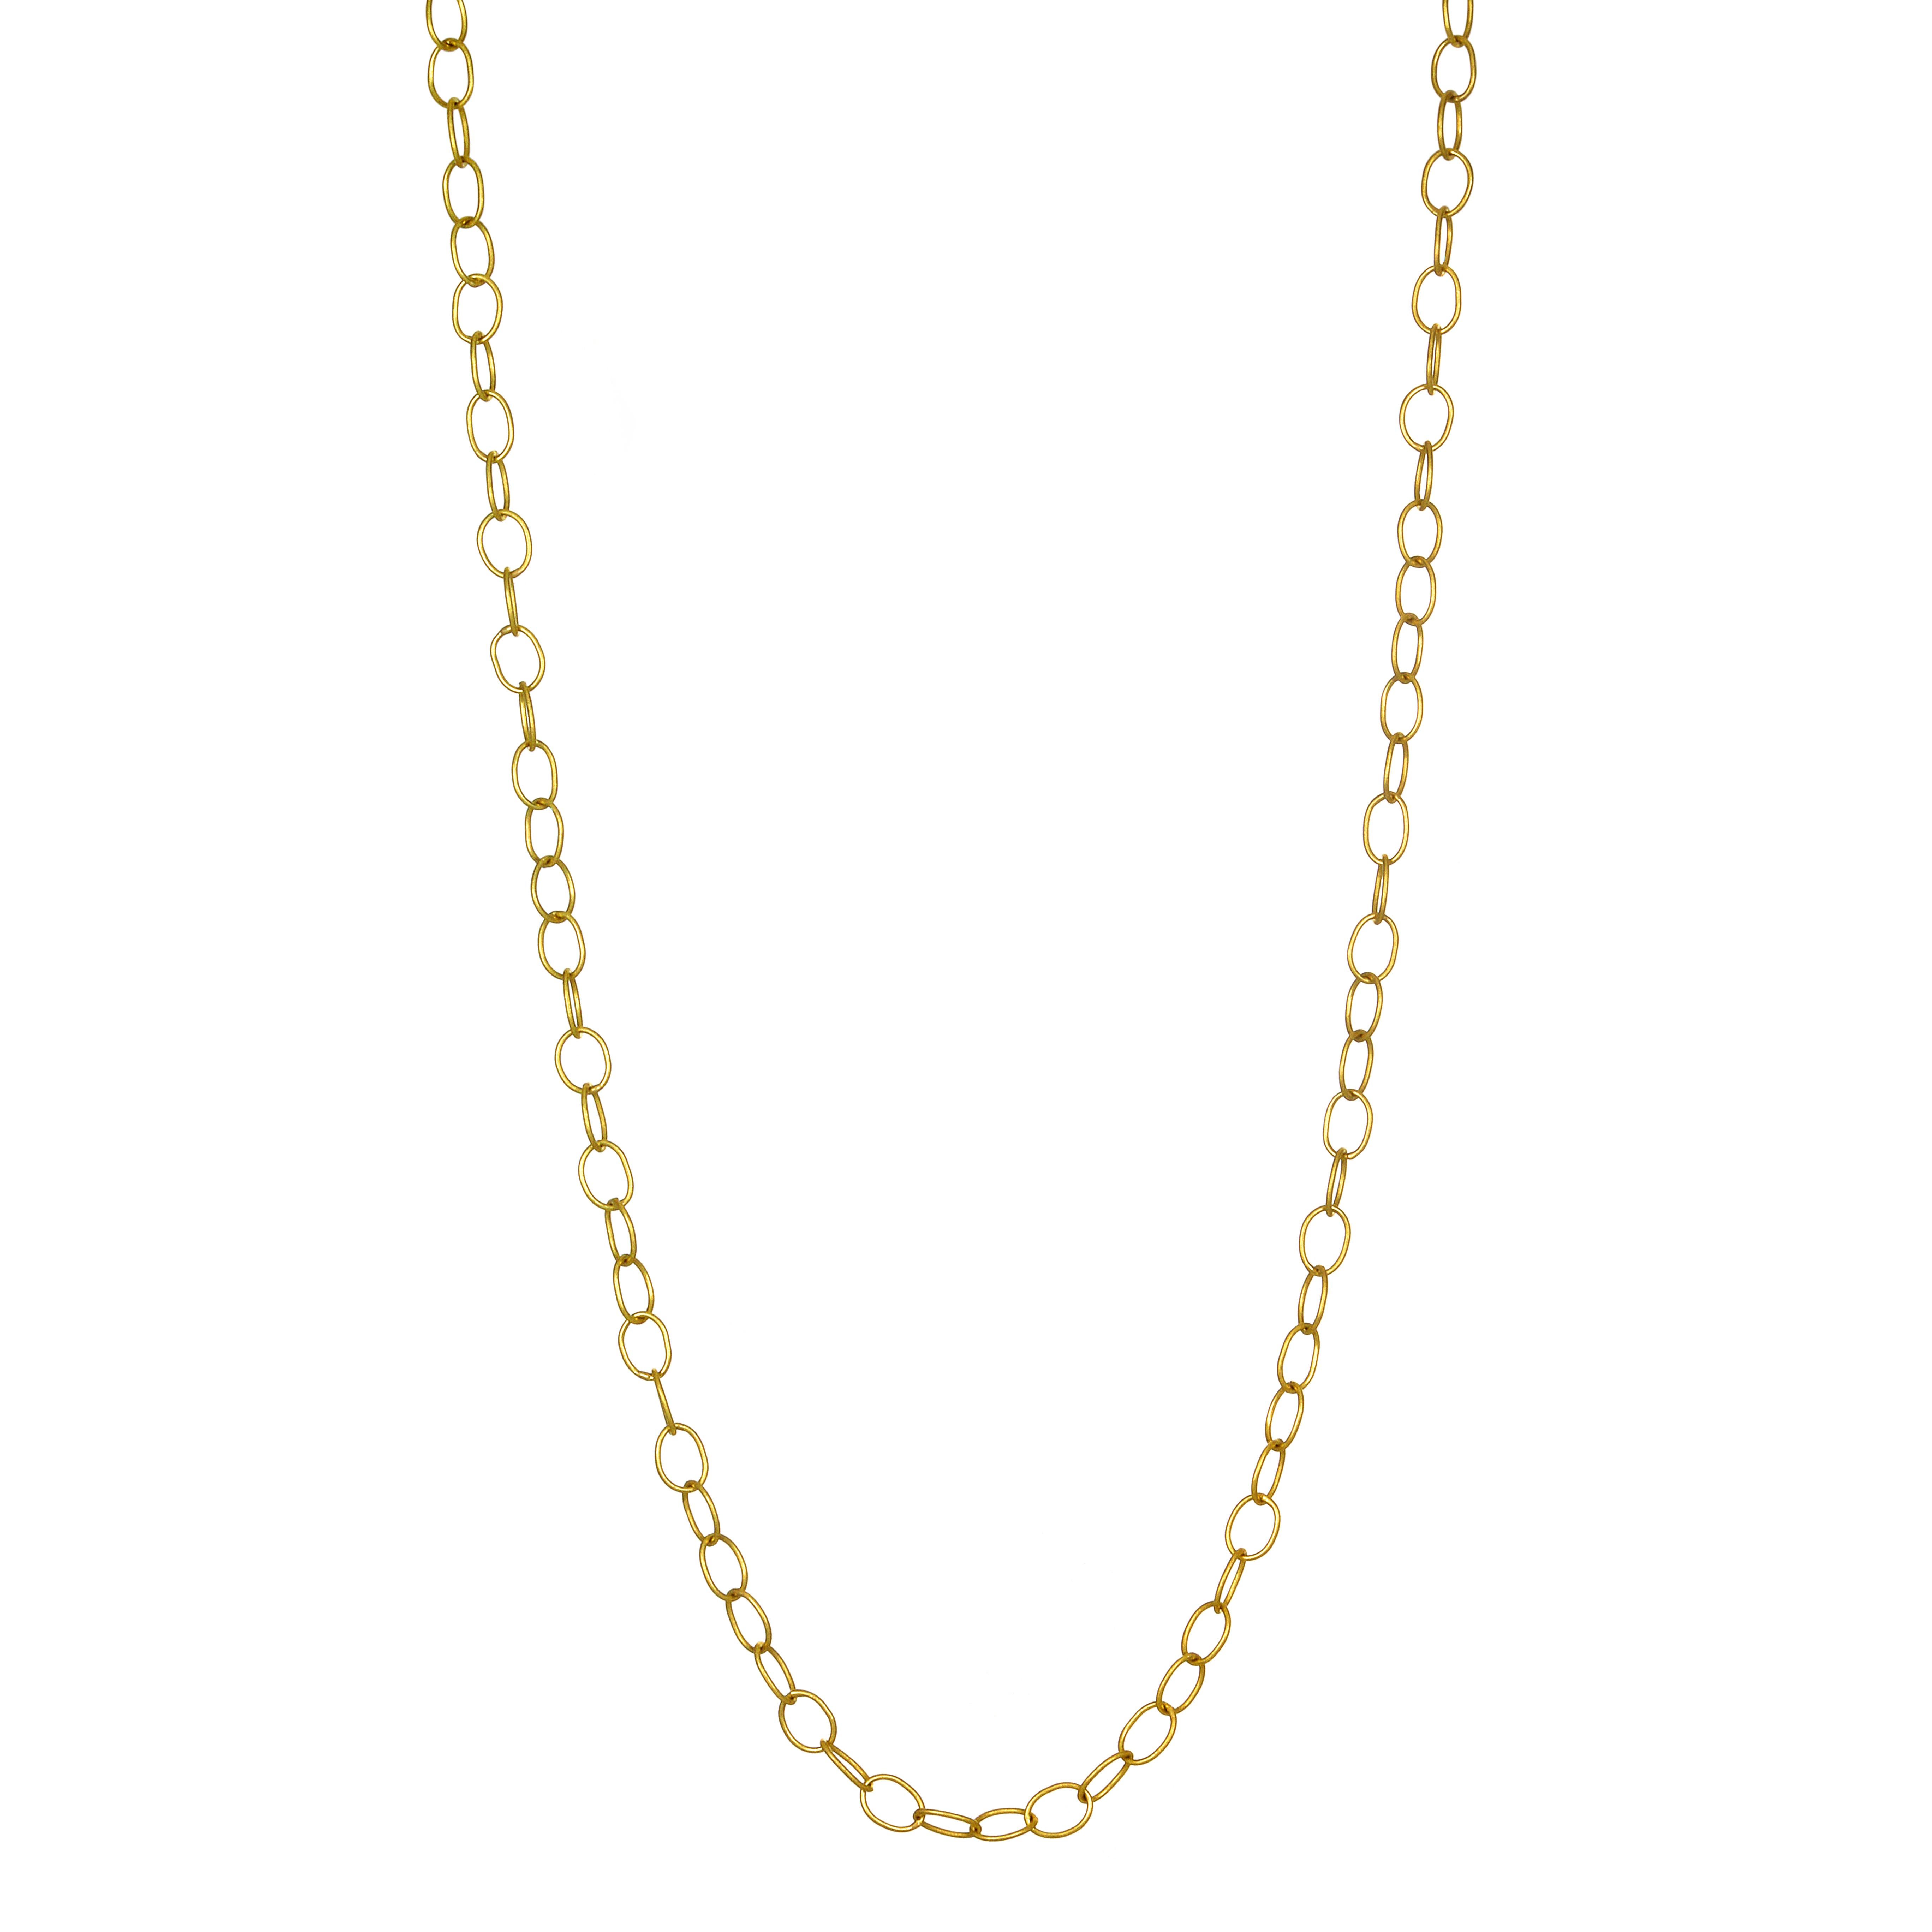 Faye Kim 18 Karat Gold Handmade Medium Oval Link Chain

Classic and versatile, Faye's 18k gold handmade medium oval link chain is a must in every jewelry wardrobe. It elevates the traditional cable link chain to a new level. 3MM in width, it's great